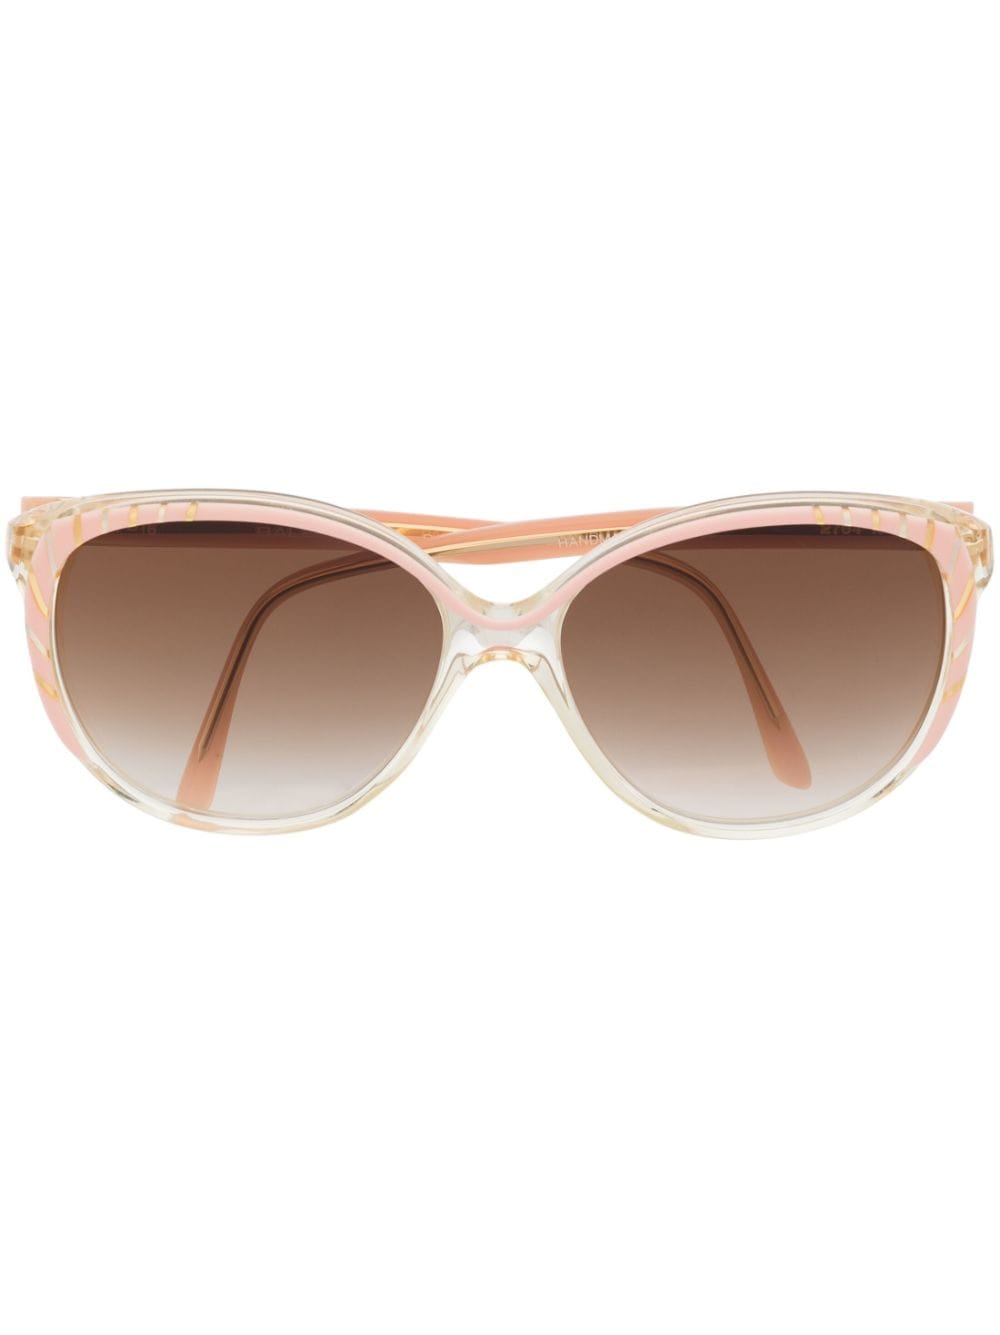 Balenciaga Pre-Owned 1980s round-frame sunglasses - Pink